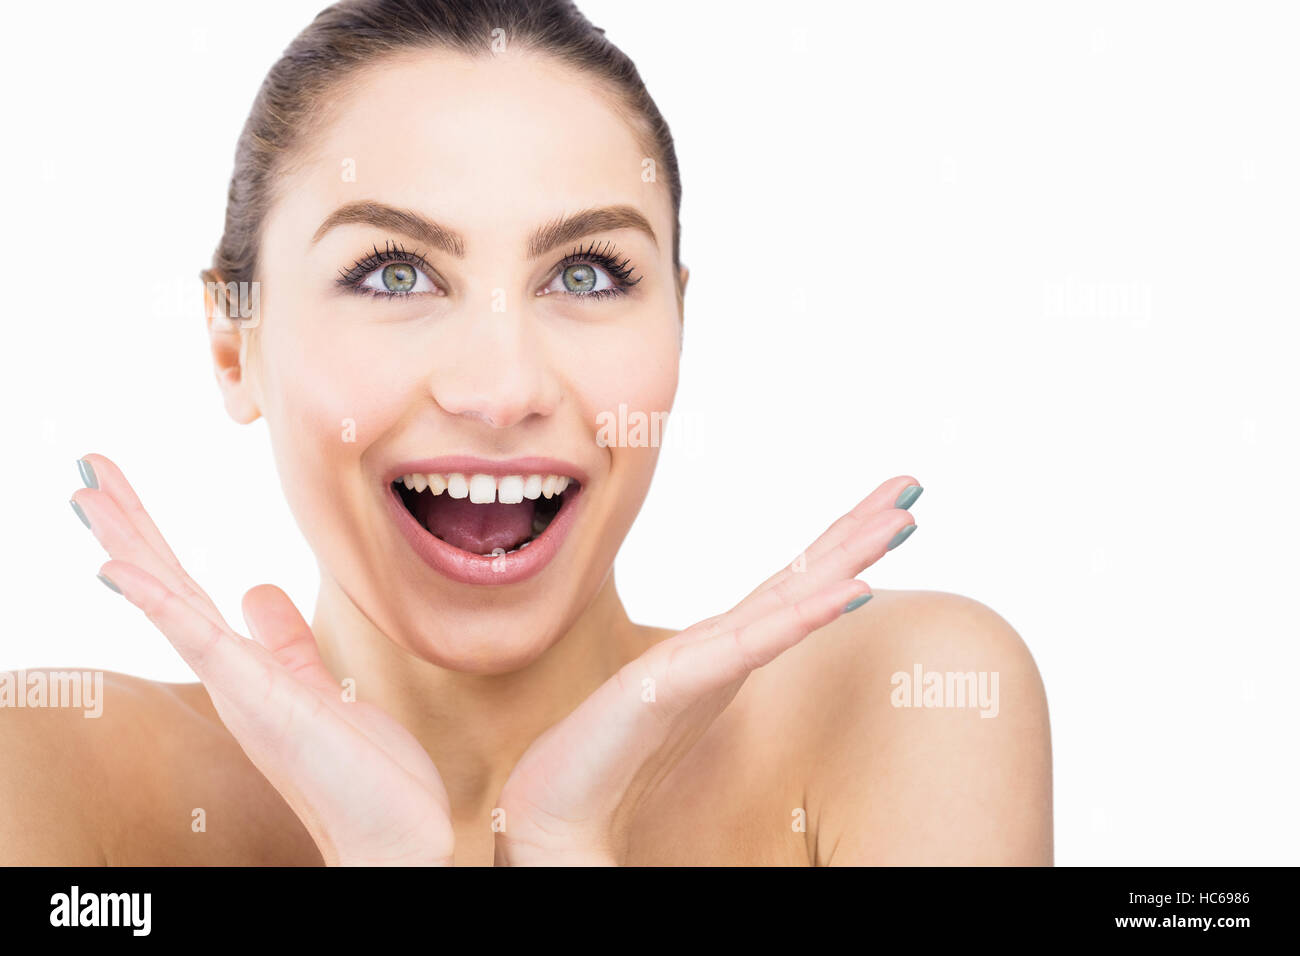 Beautiful woman posing with shocked expression against white background Stock Photo